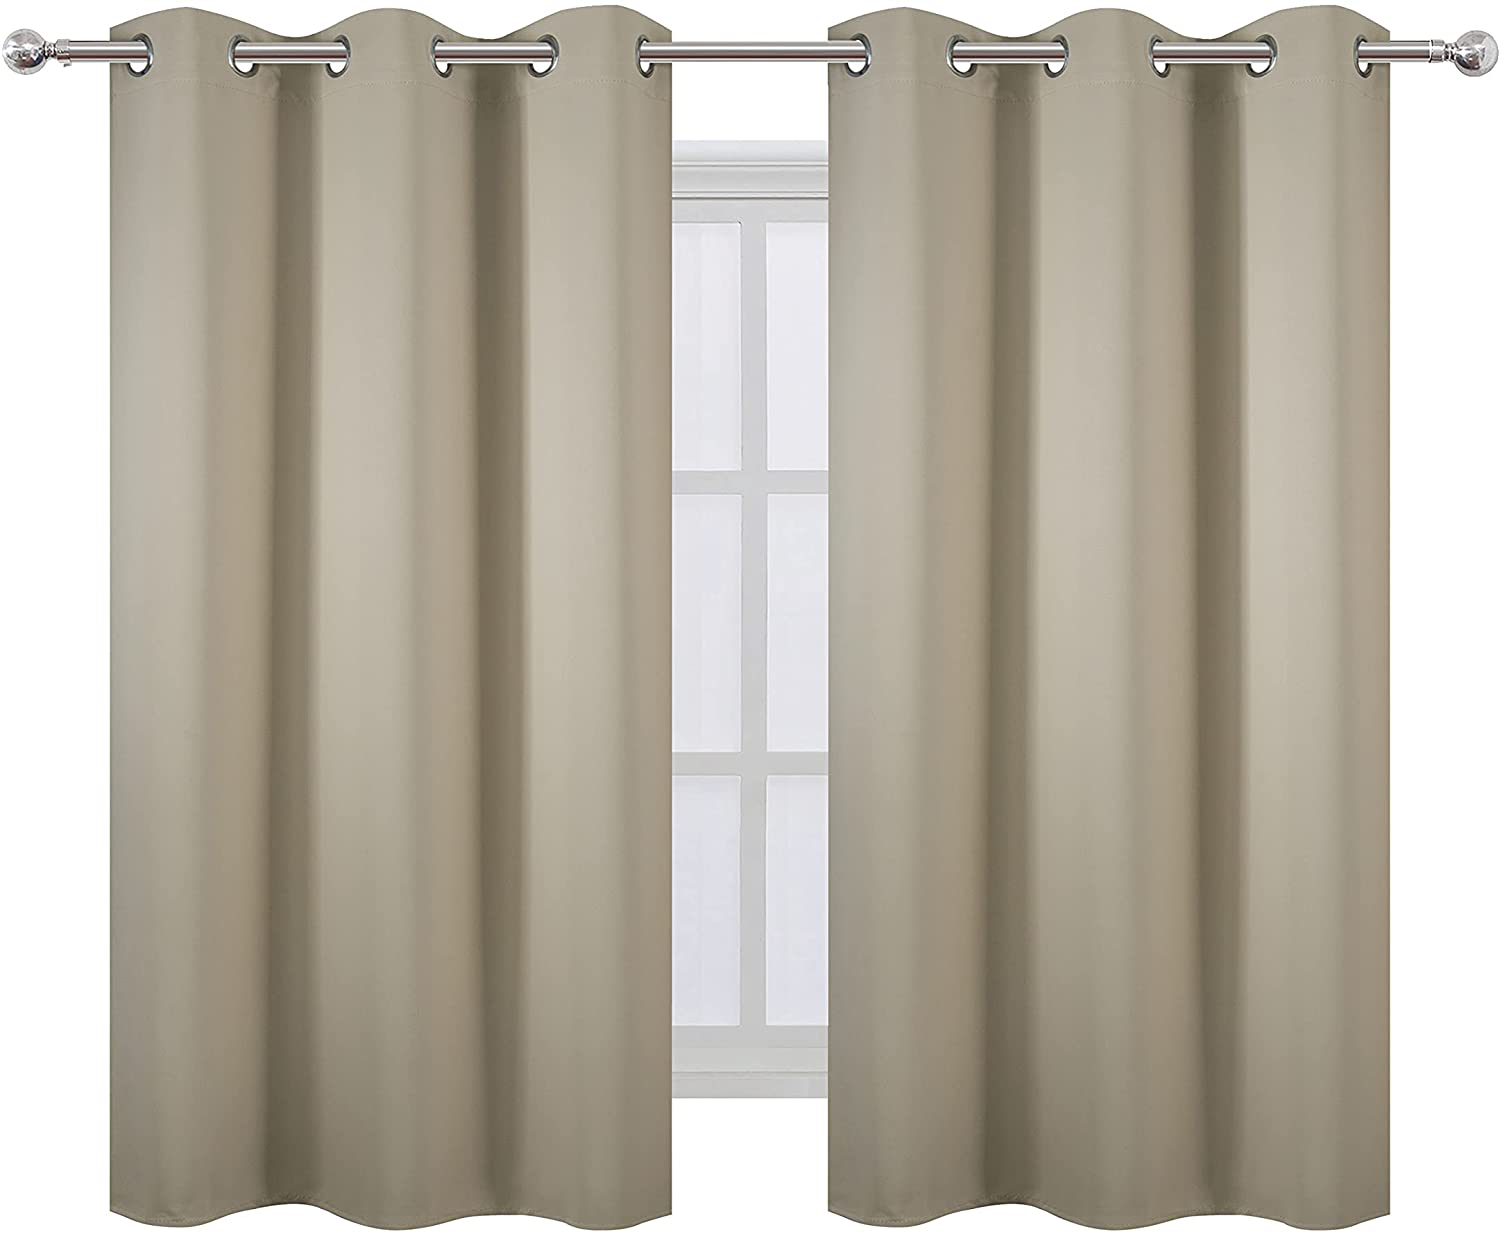 LEMOMO Purple Thermal Blackout Curtains/42 x 95 Inch/Set of 2 Panels Room Darkening Curtains for Bedroom